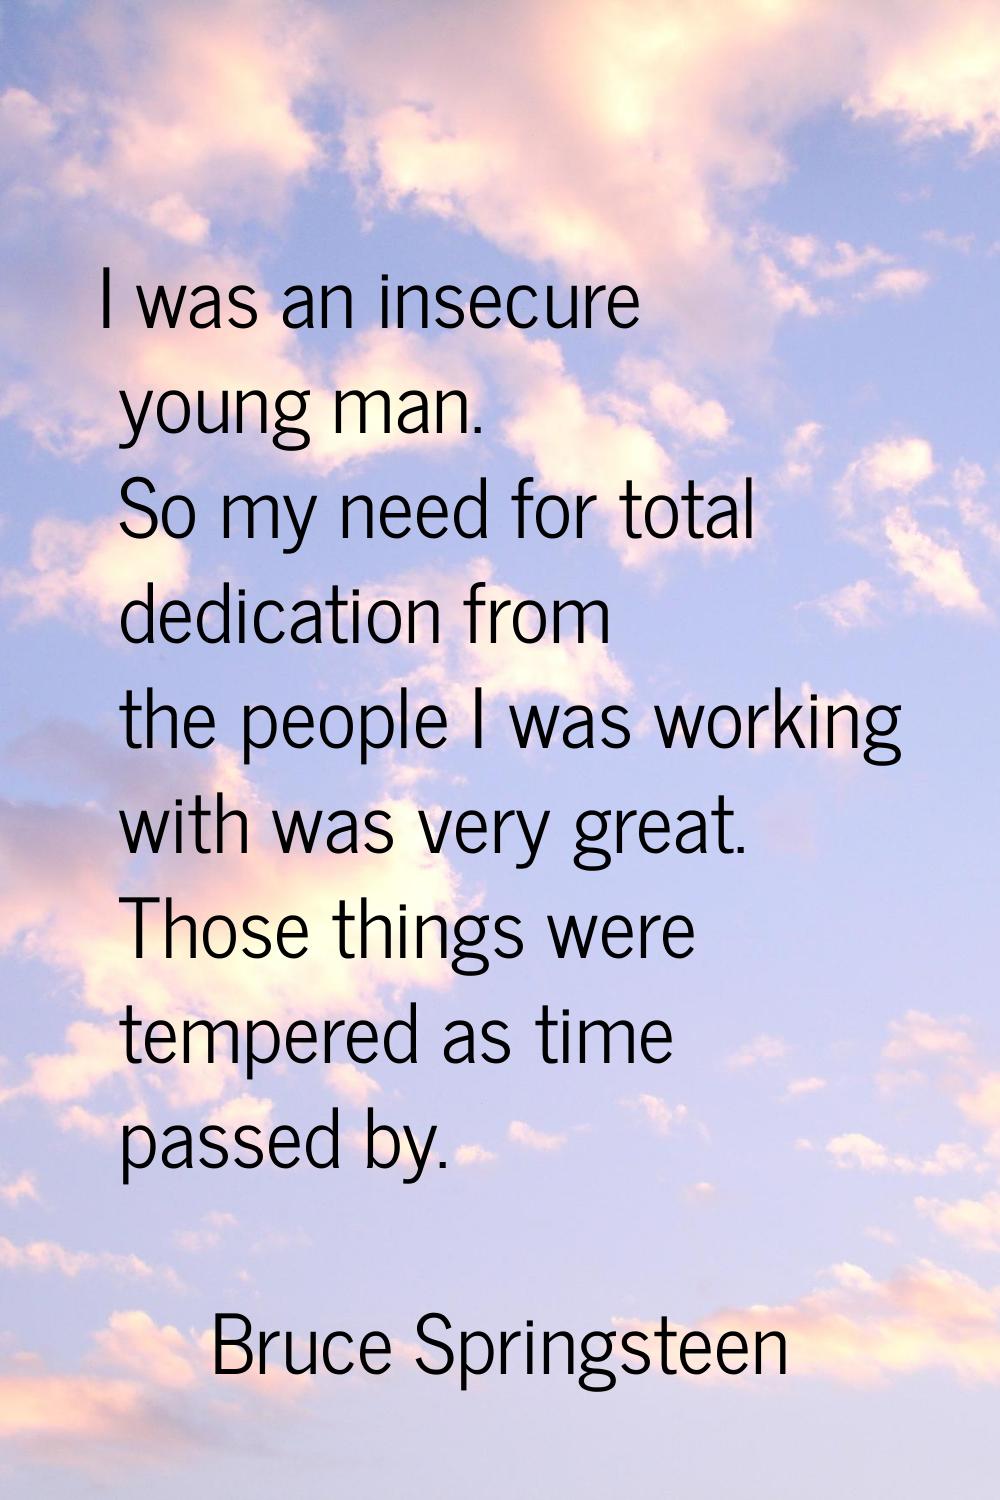 I was an insecure young man. So my need for total dedication from the people I was working with was